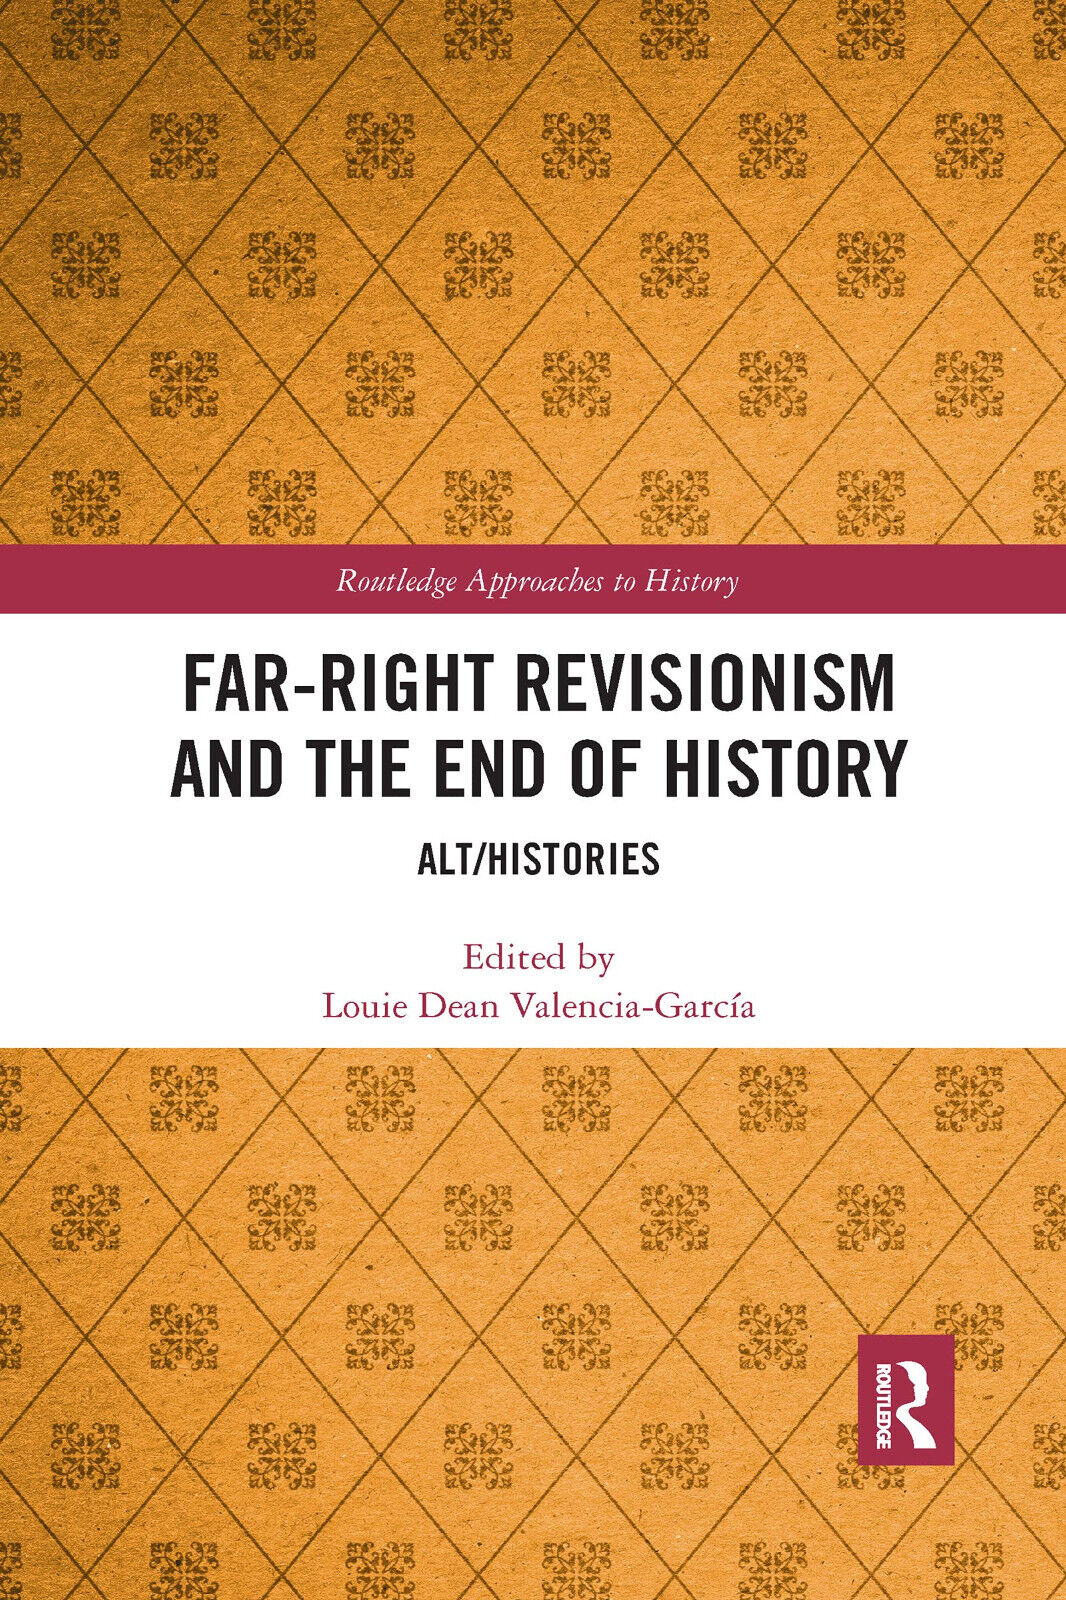 Far-Right Revisionism And The End Of History - ouie Dean Valencia-Garc?a - 2021